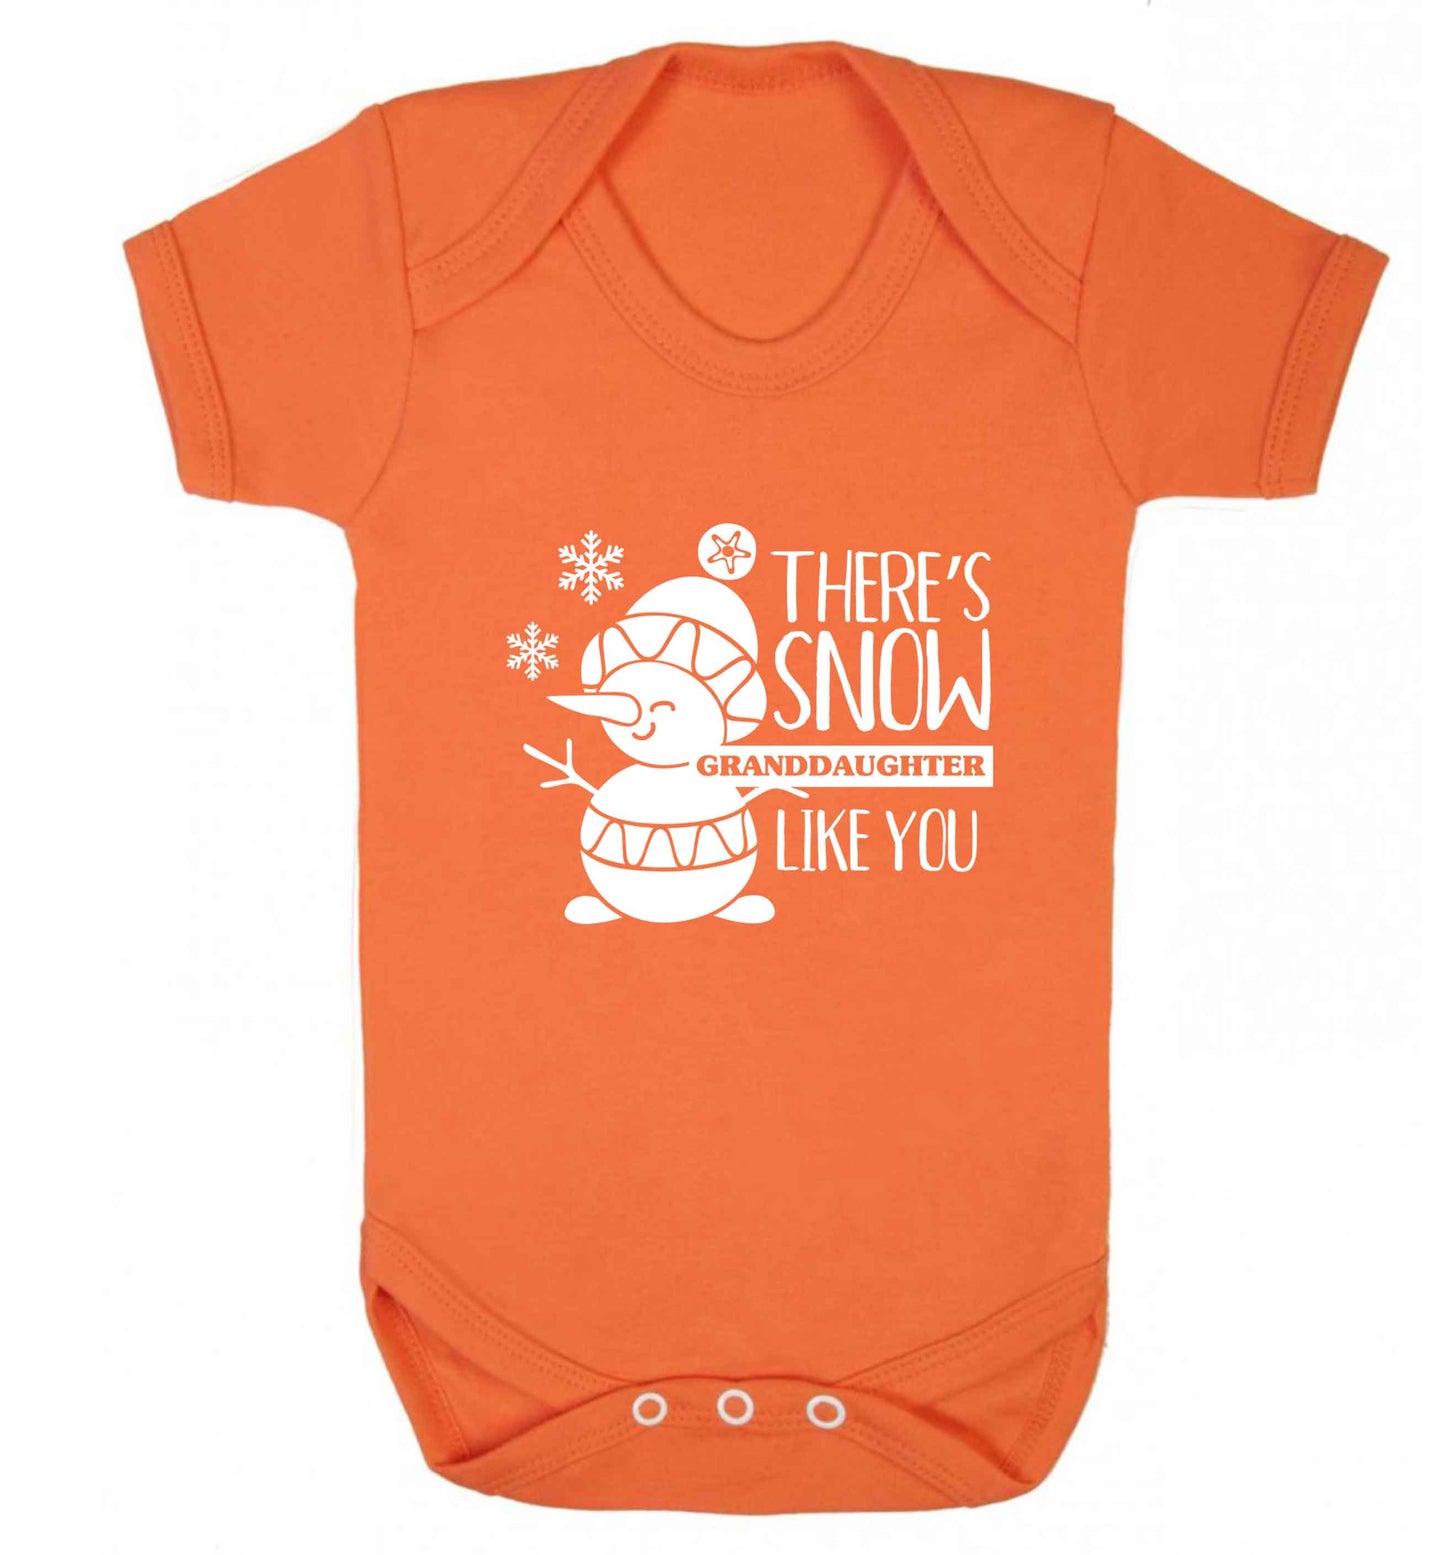 There's snow granddaughter like you baby vest orange 18-24 months